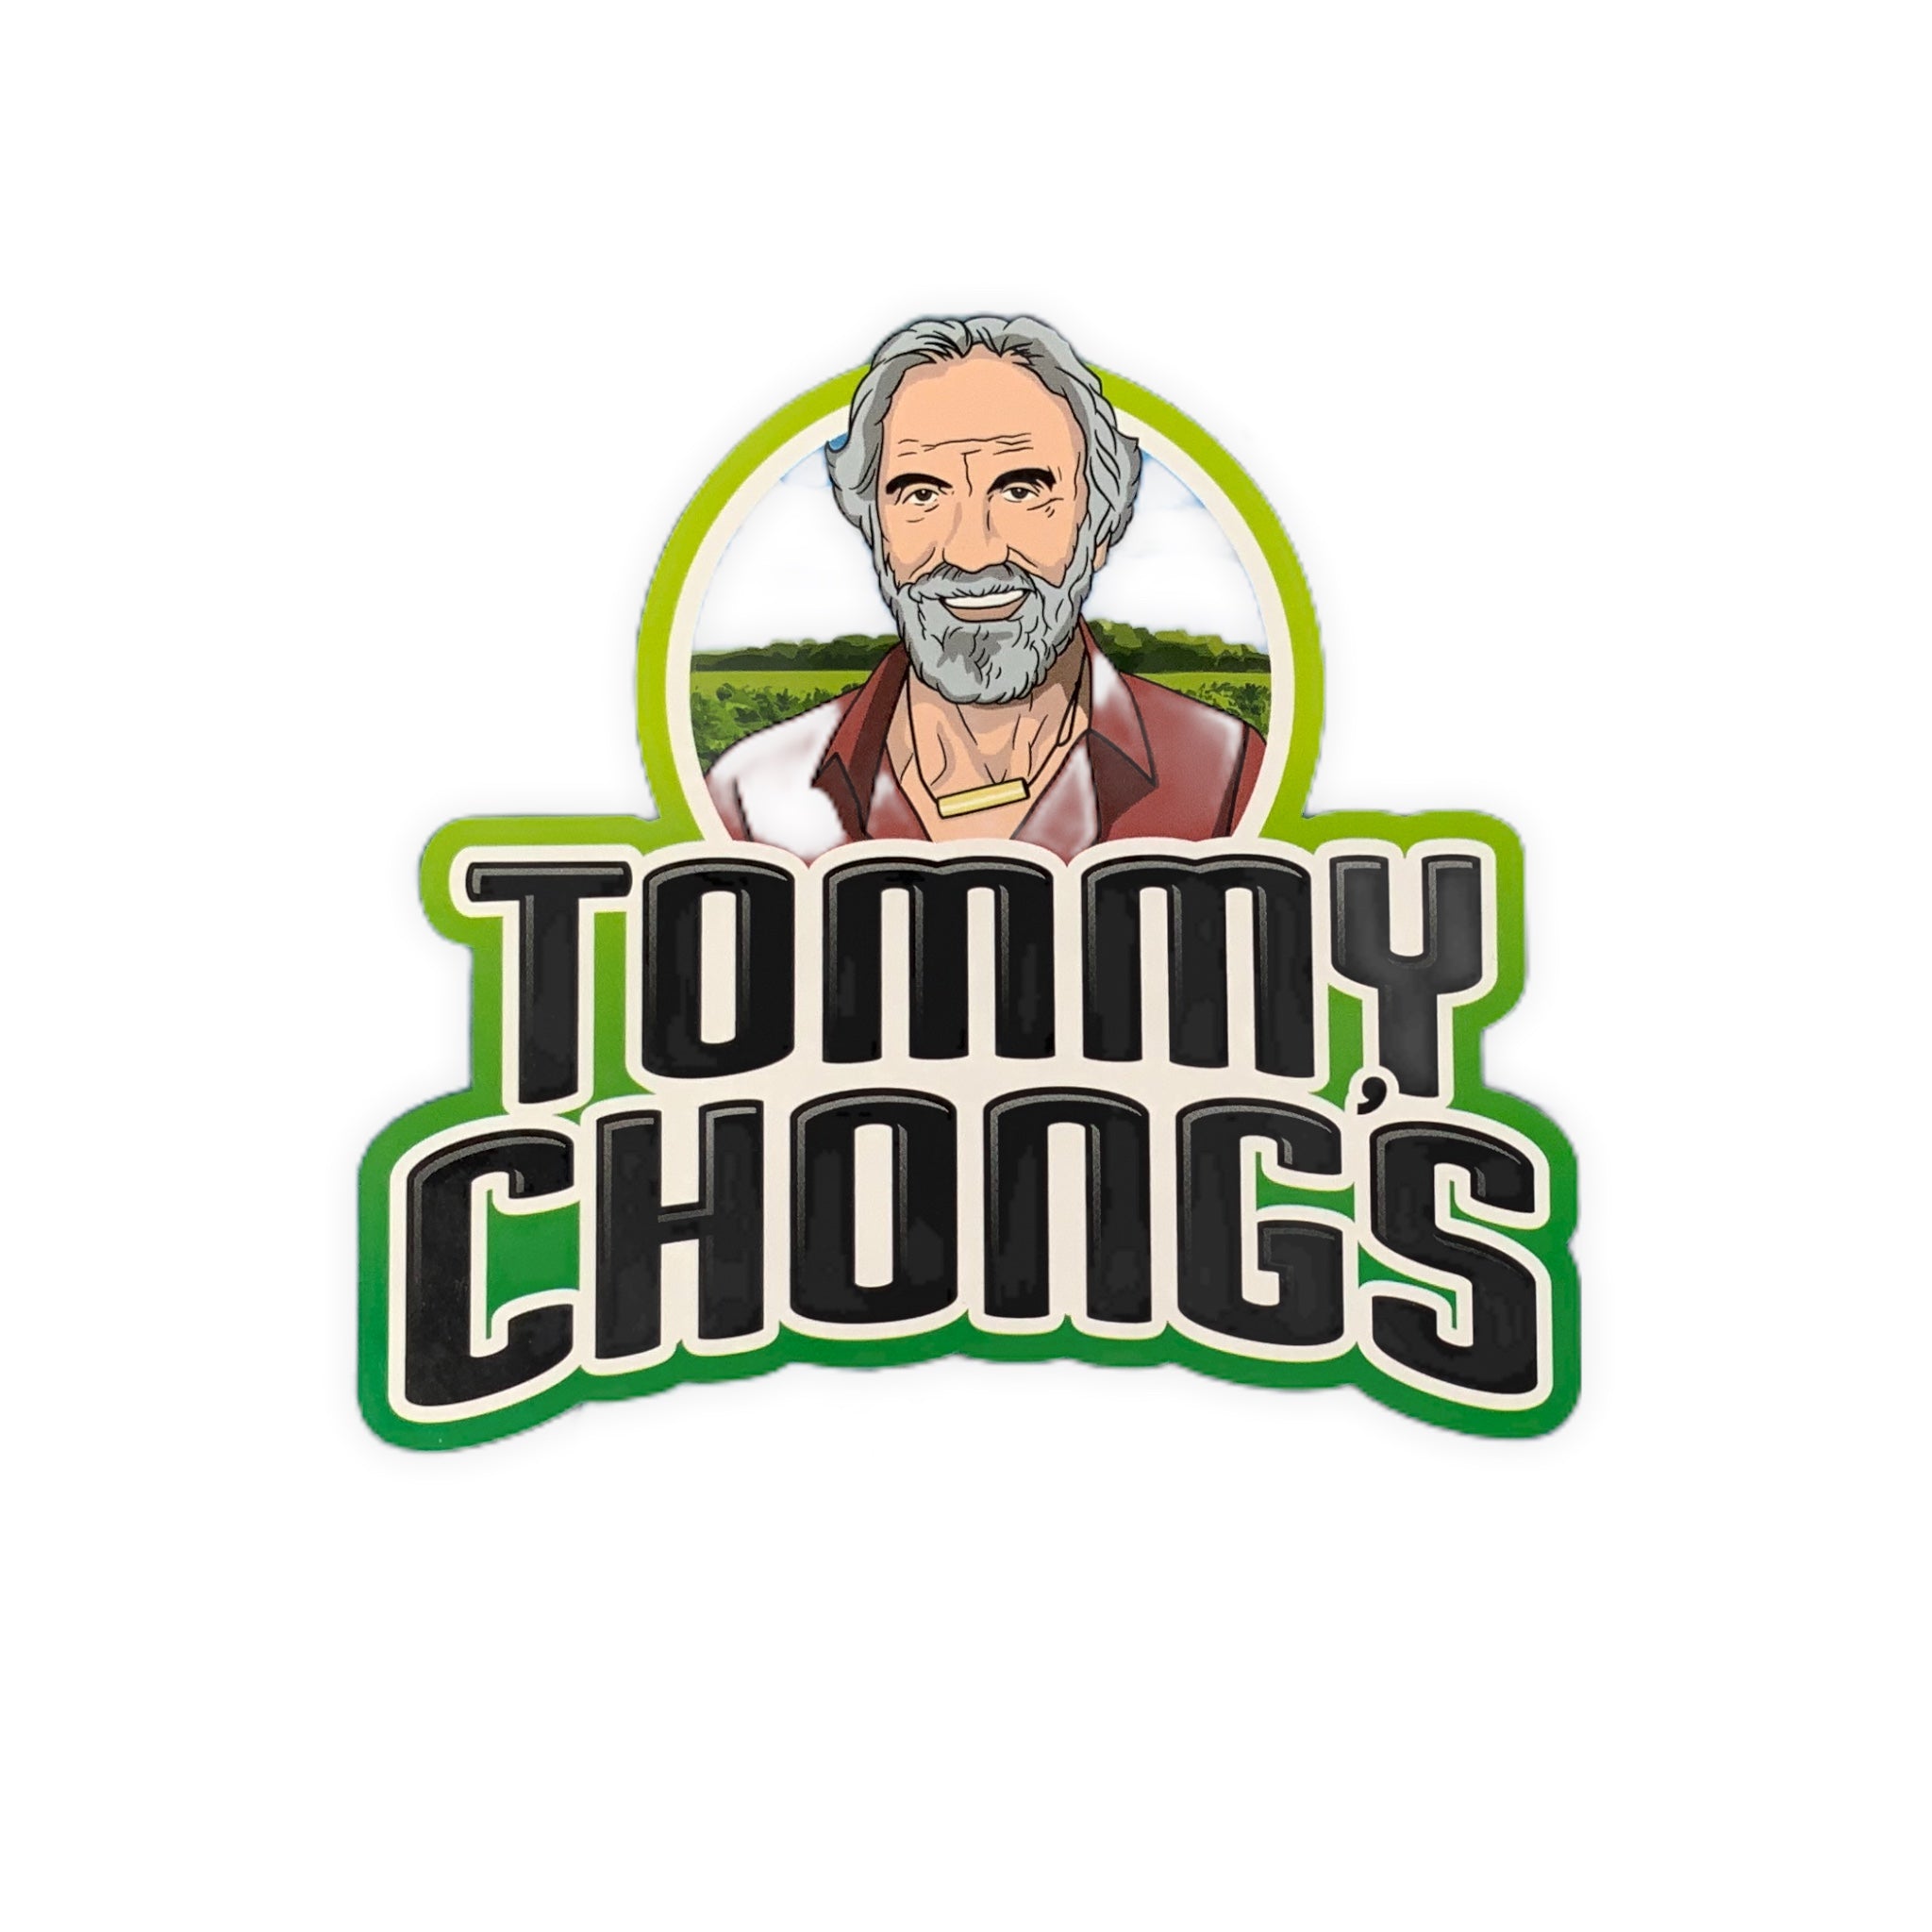 Tommy Chongs